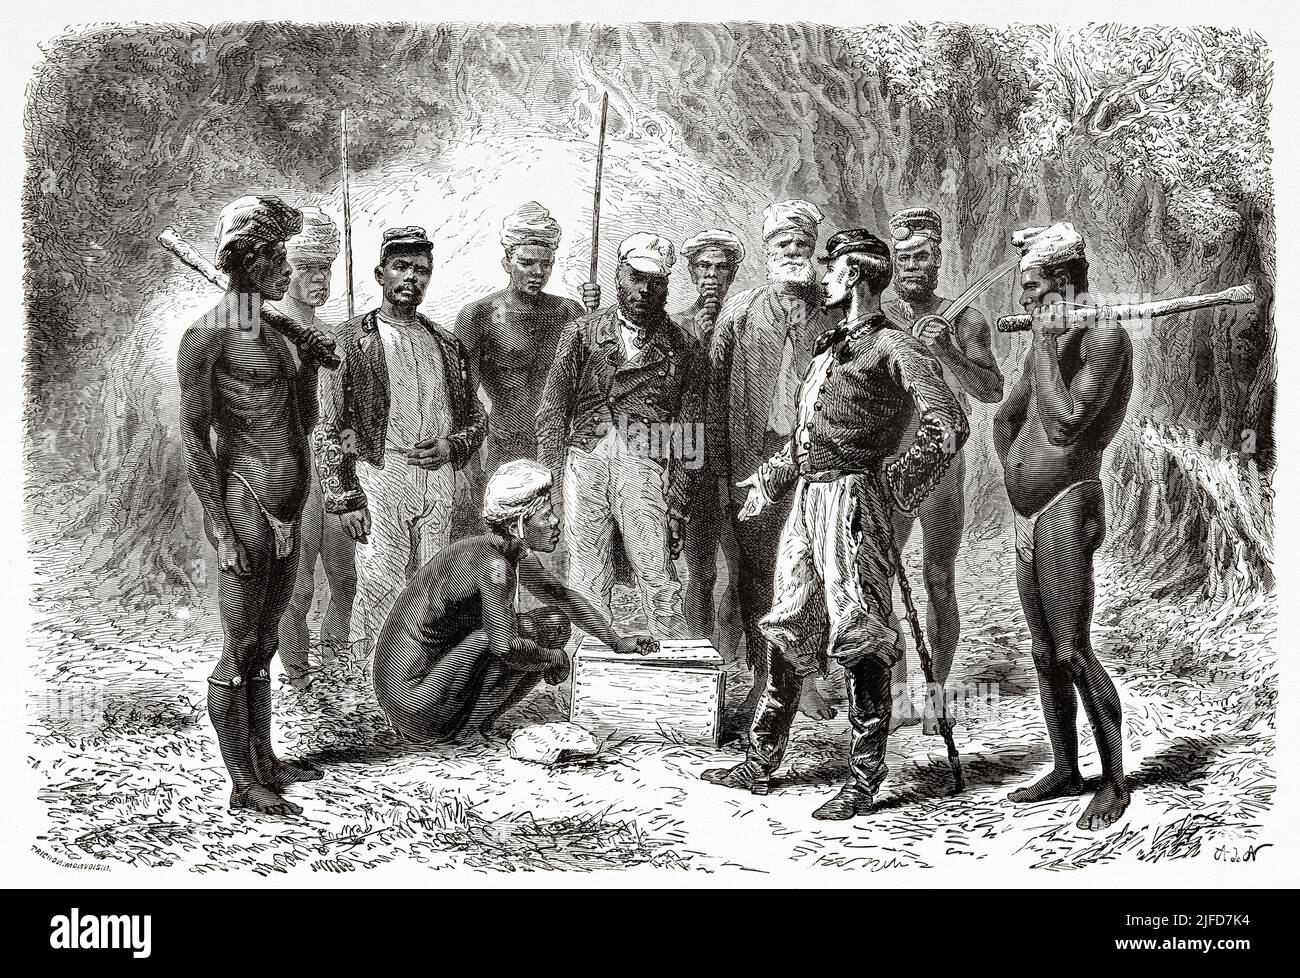 French emissary giving gifts to New Caledonian natives, New Caledonia. Journey to New Caledonia by Jules Garnier 1863-1866 from Le Tour du Monde 1867 Stock Photo